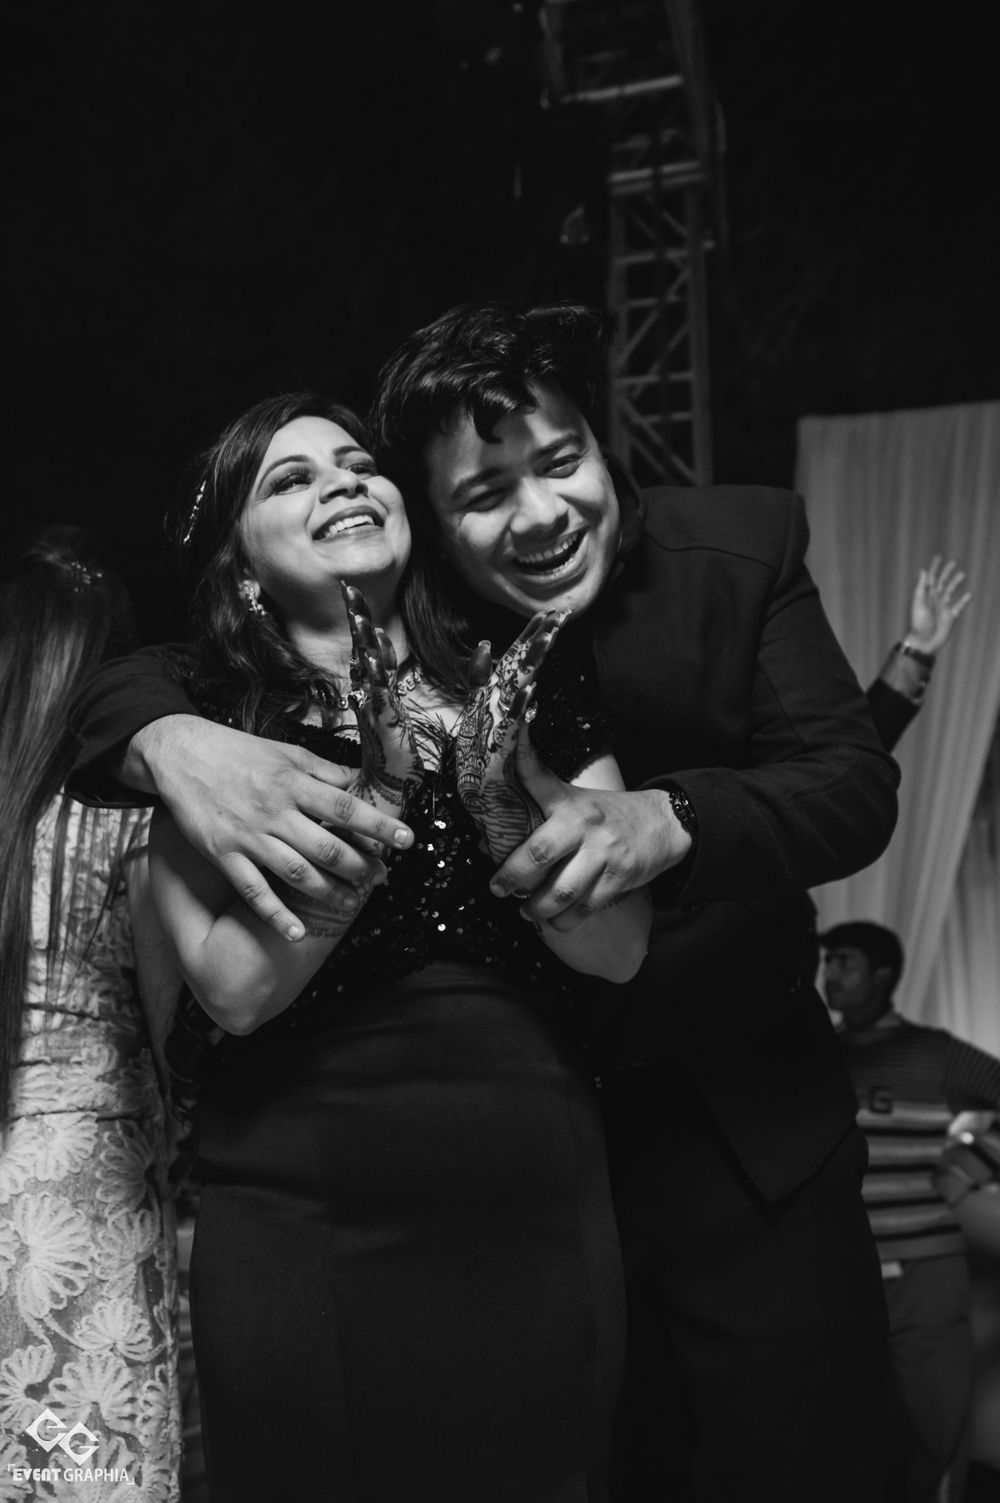 Photo From Hansika-Kunal - By EventGraphia